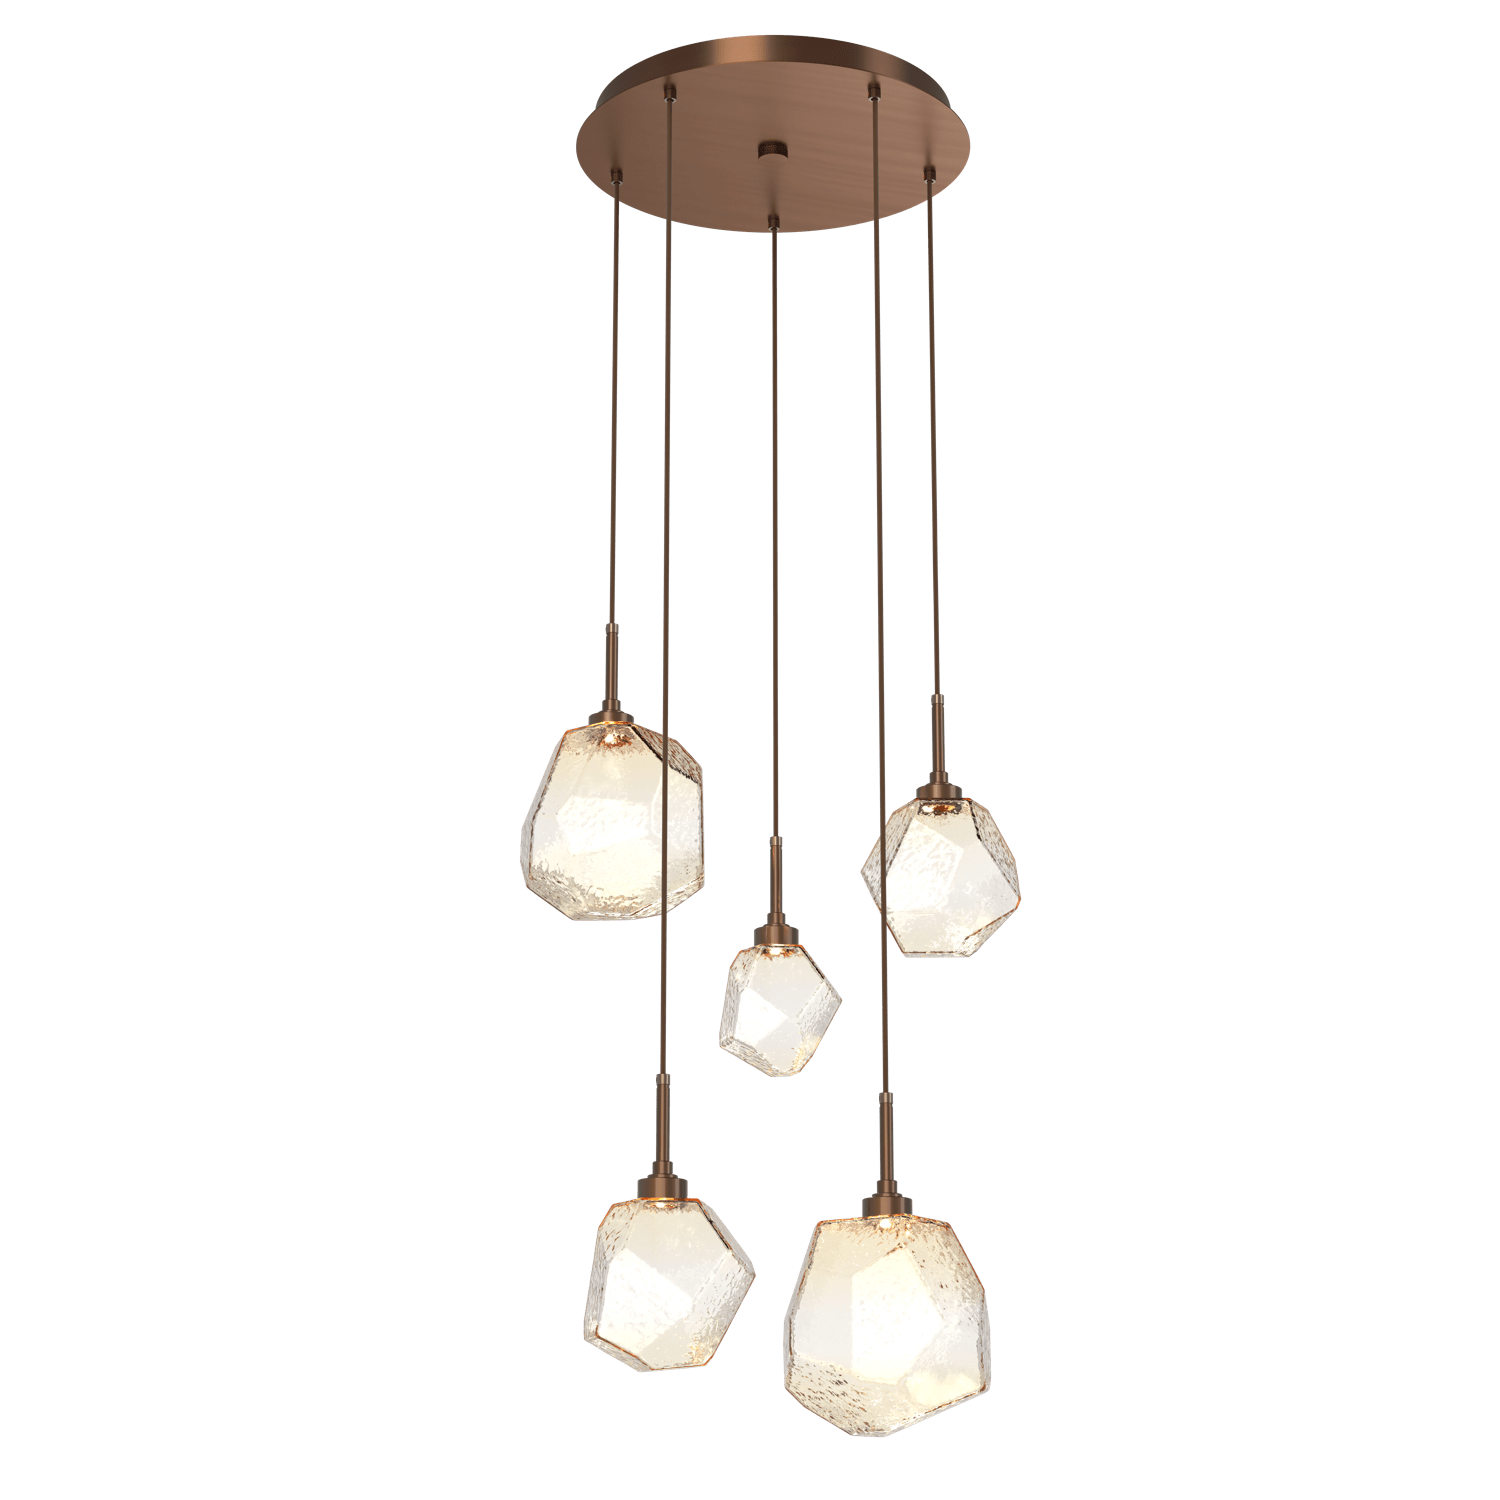 CHB0039-05-RB-A-Hammerton-Studio-Gem-5-light-round-pendant-chandelier-with-oil-rubbed-bronze-finish-and-amber-blown-glass-shades-and-LED-lamping